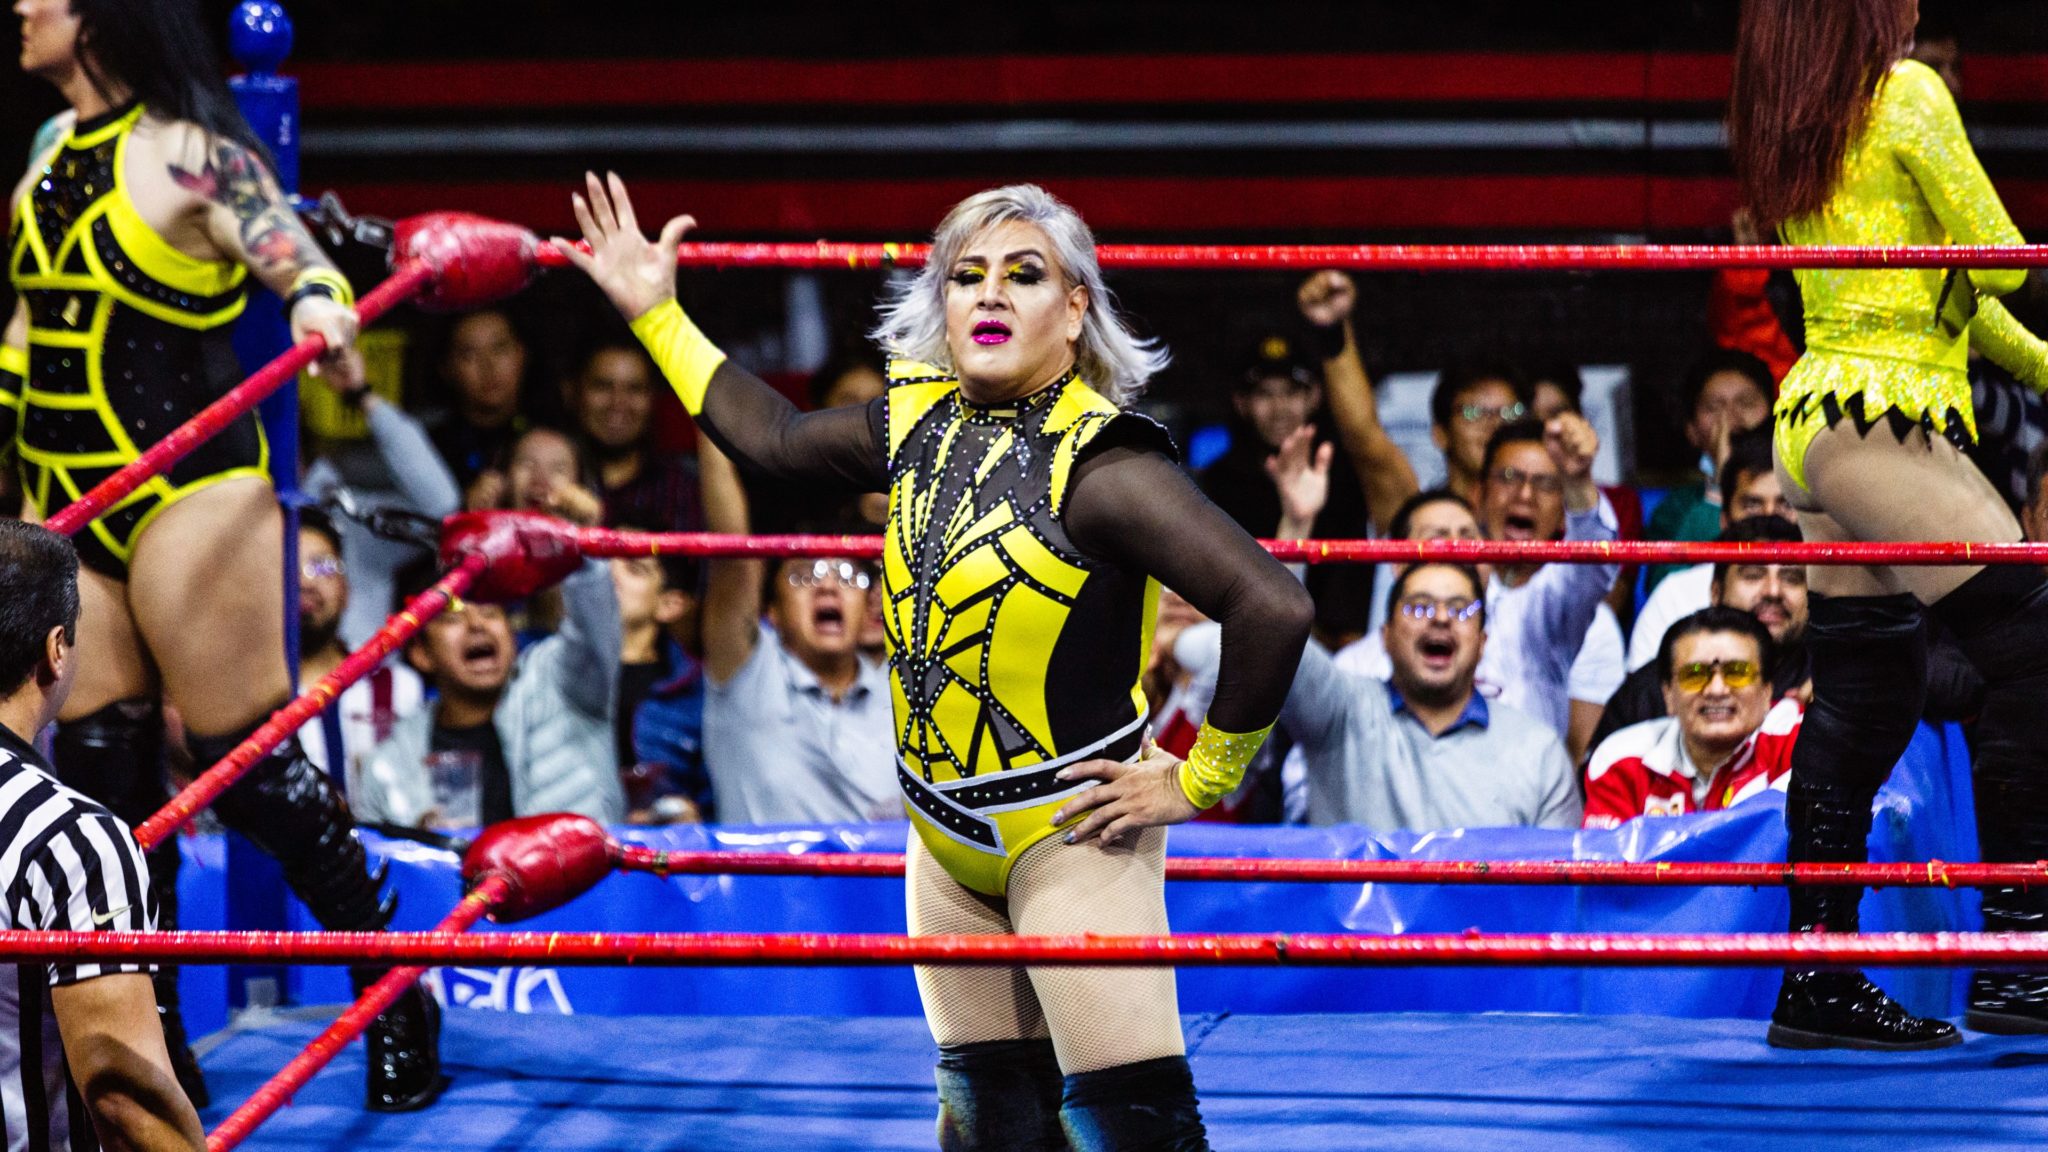 In the Ring with Los Exóticos (Mexico City)